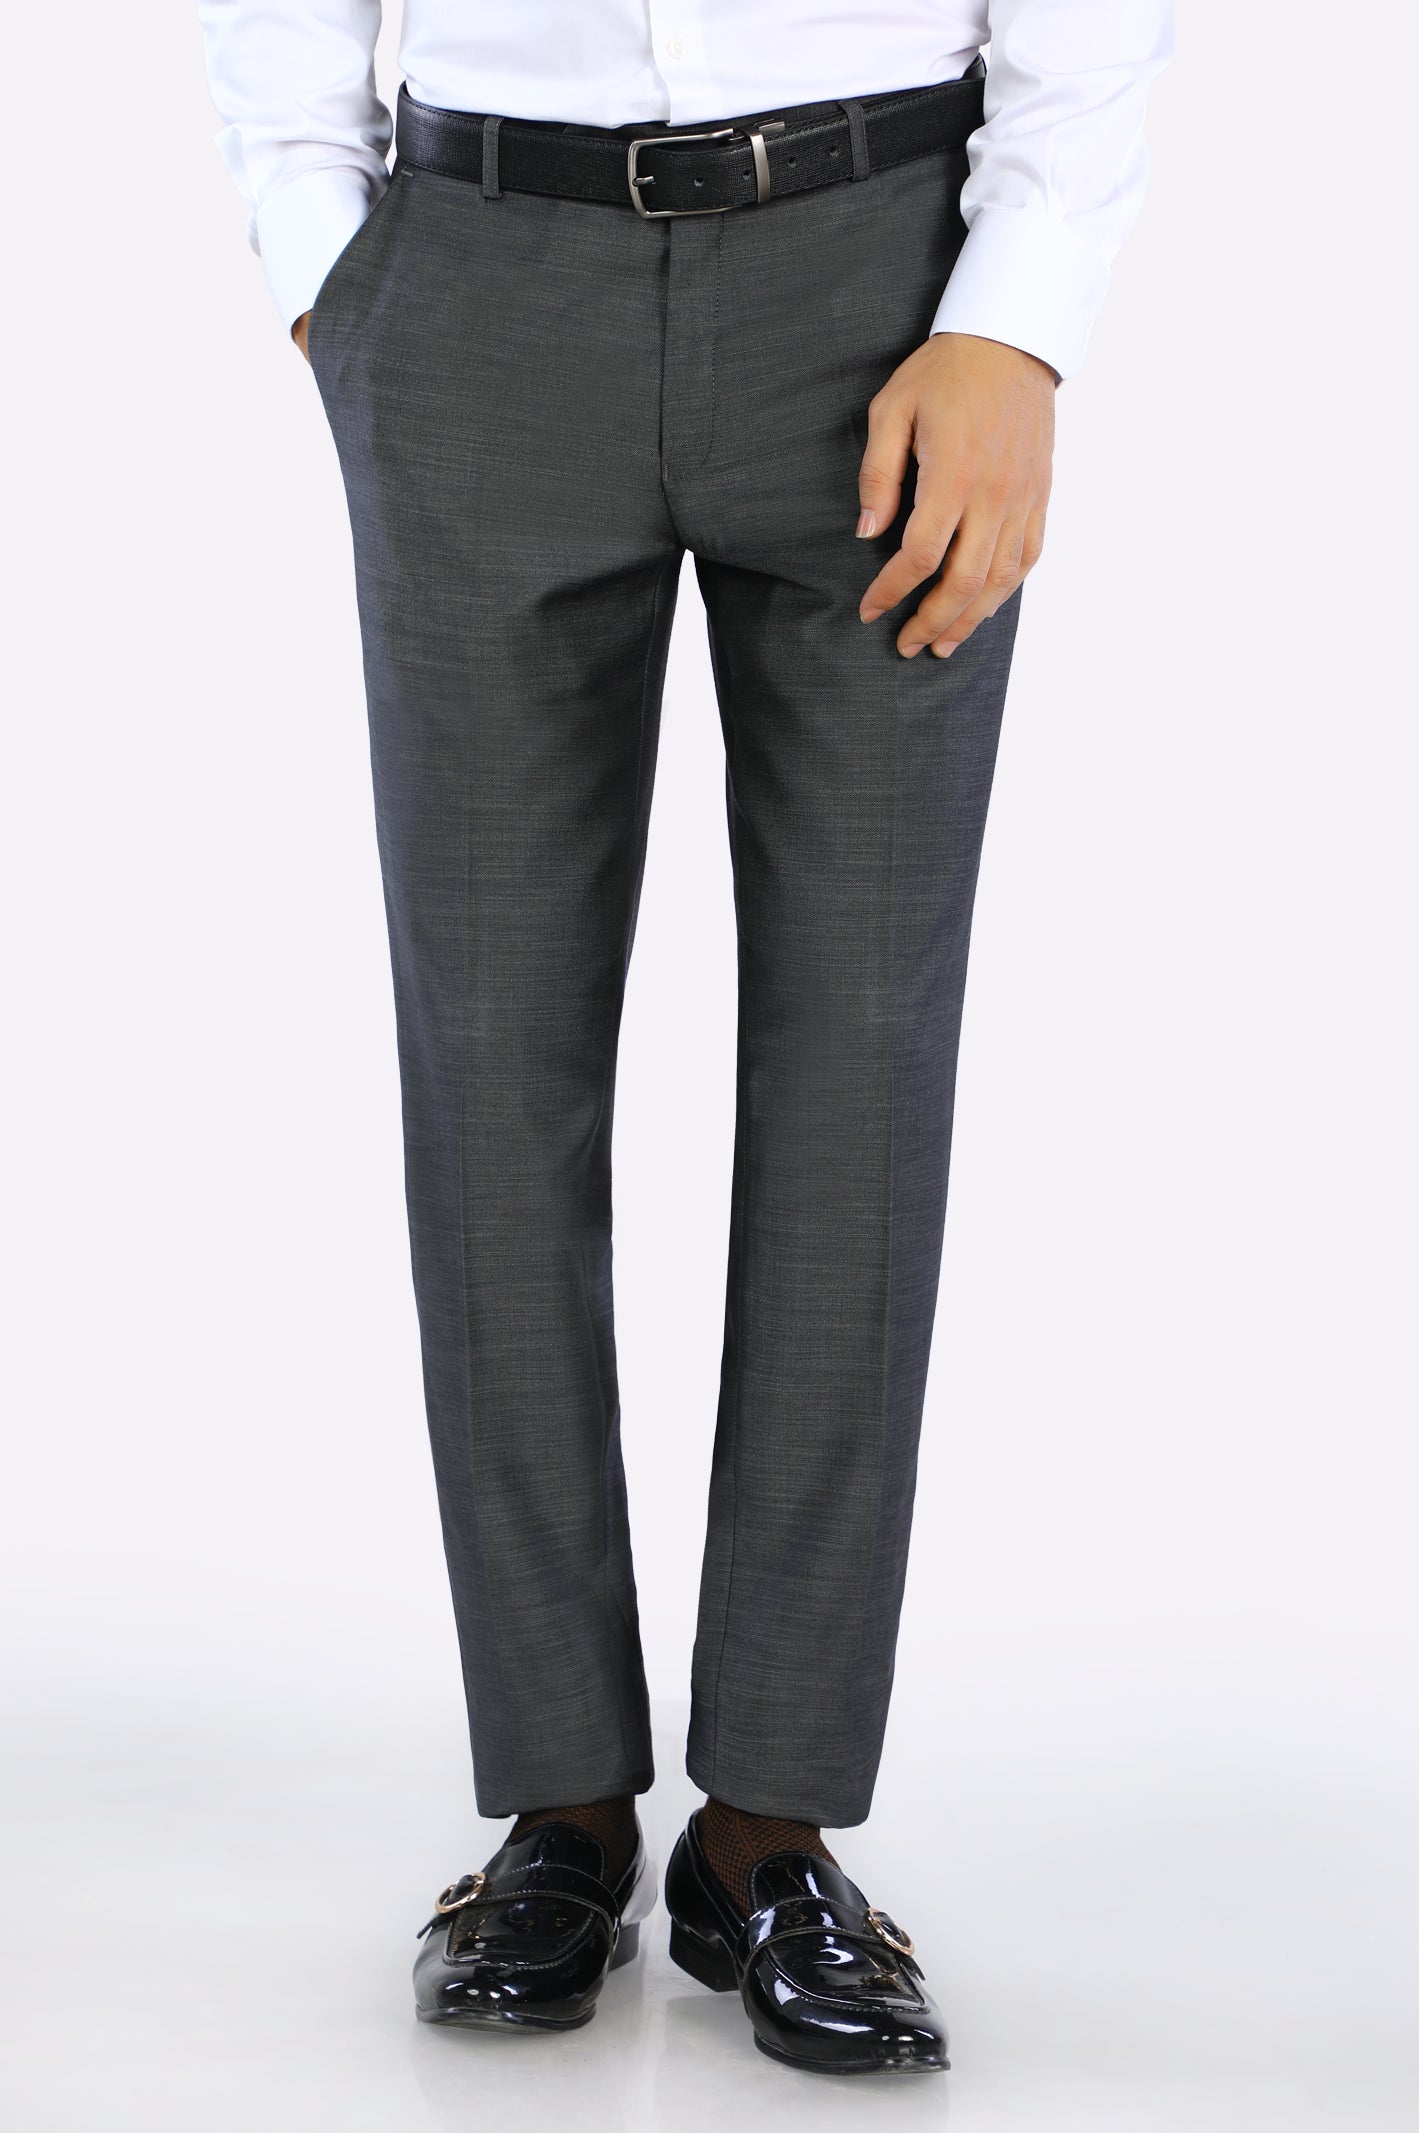 Formal Trouser for Men From Diners